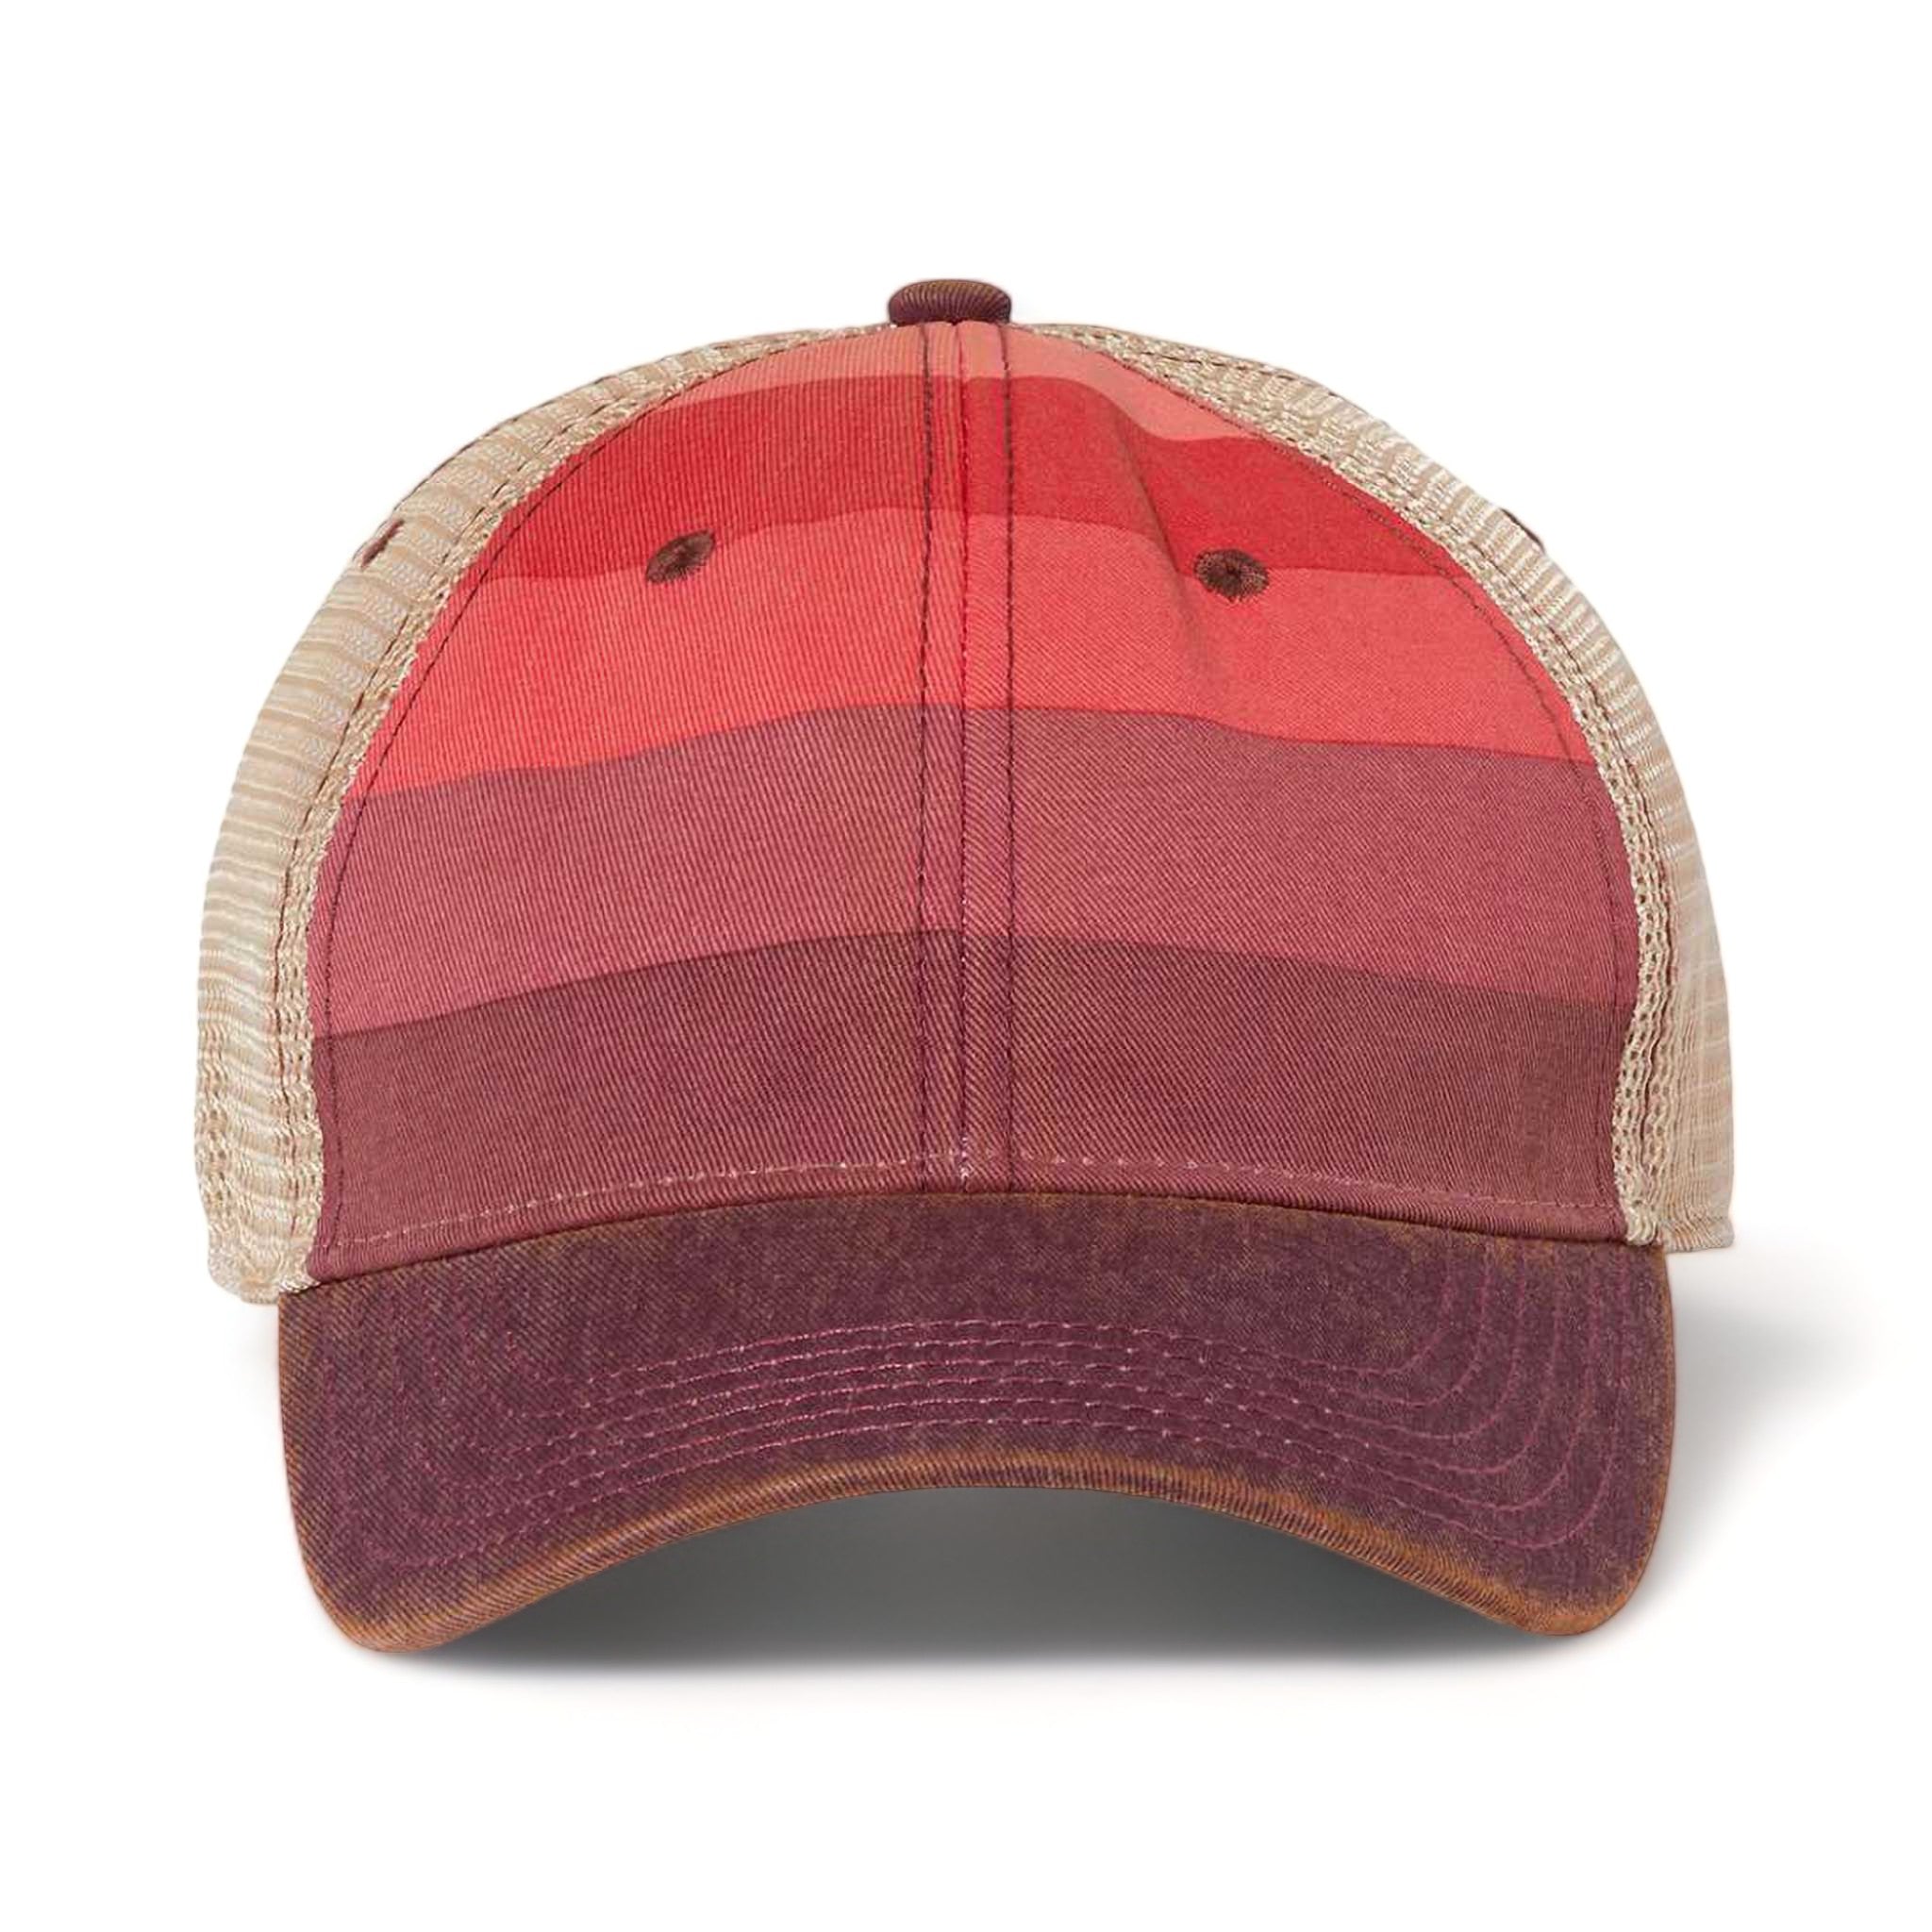 Front view of LEGACY OFA custom hat in red stripe and khaki